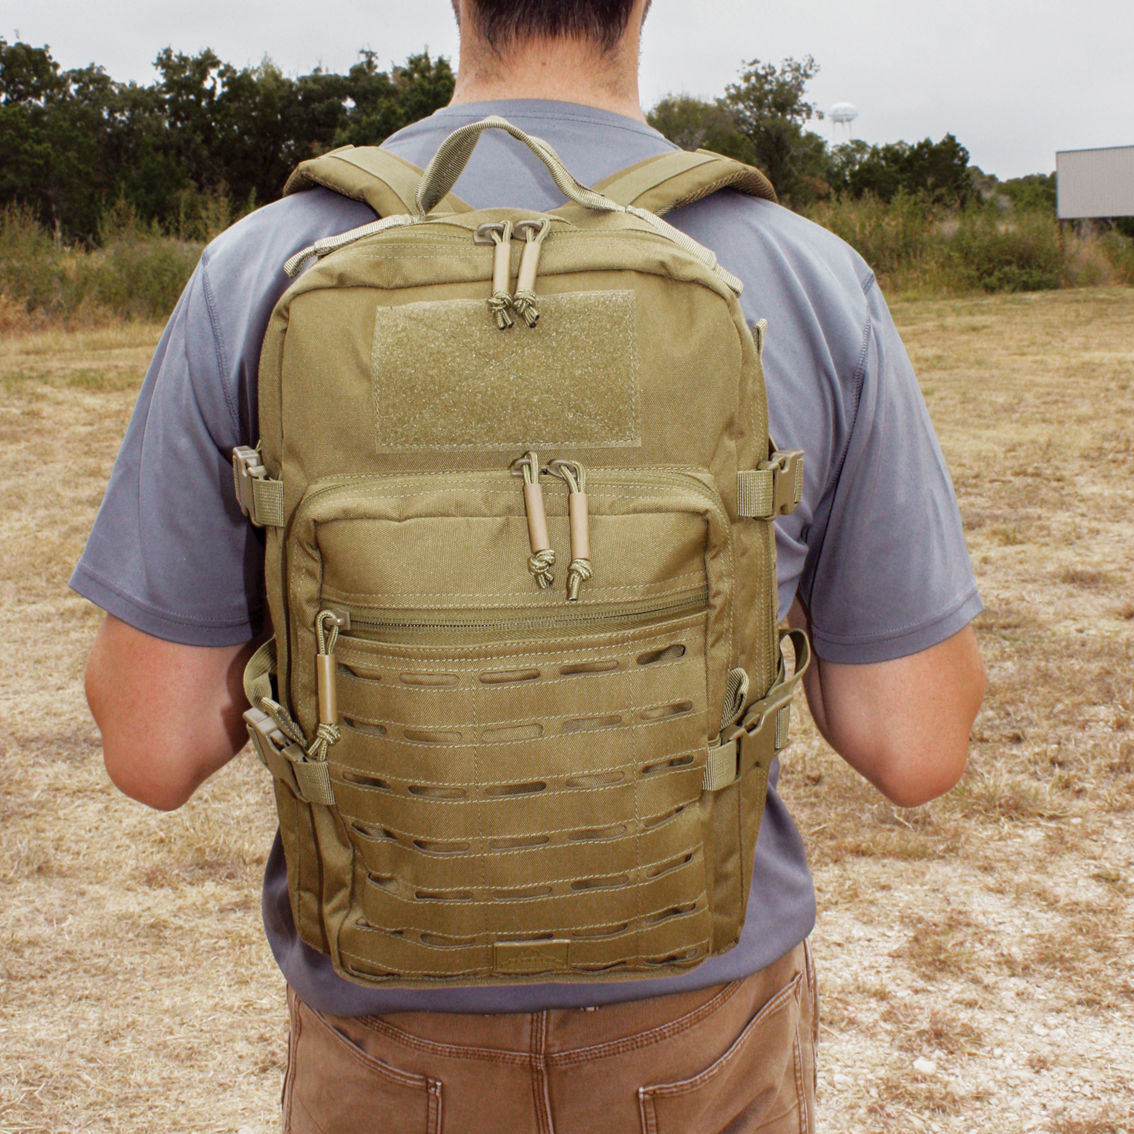 Red Rock Outdoor Gear Transporter Day Pack - Image 9 of 9